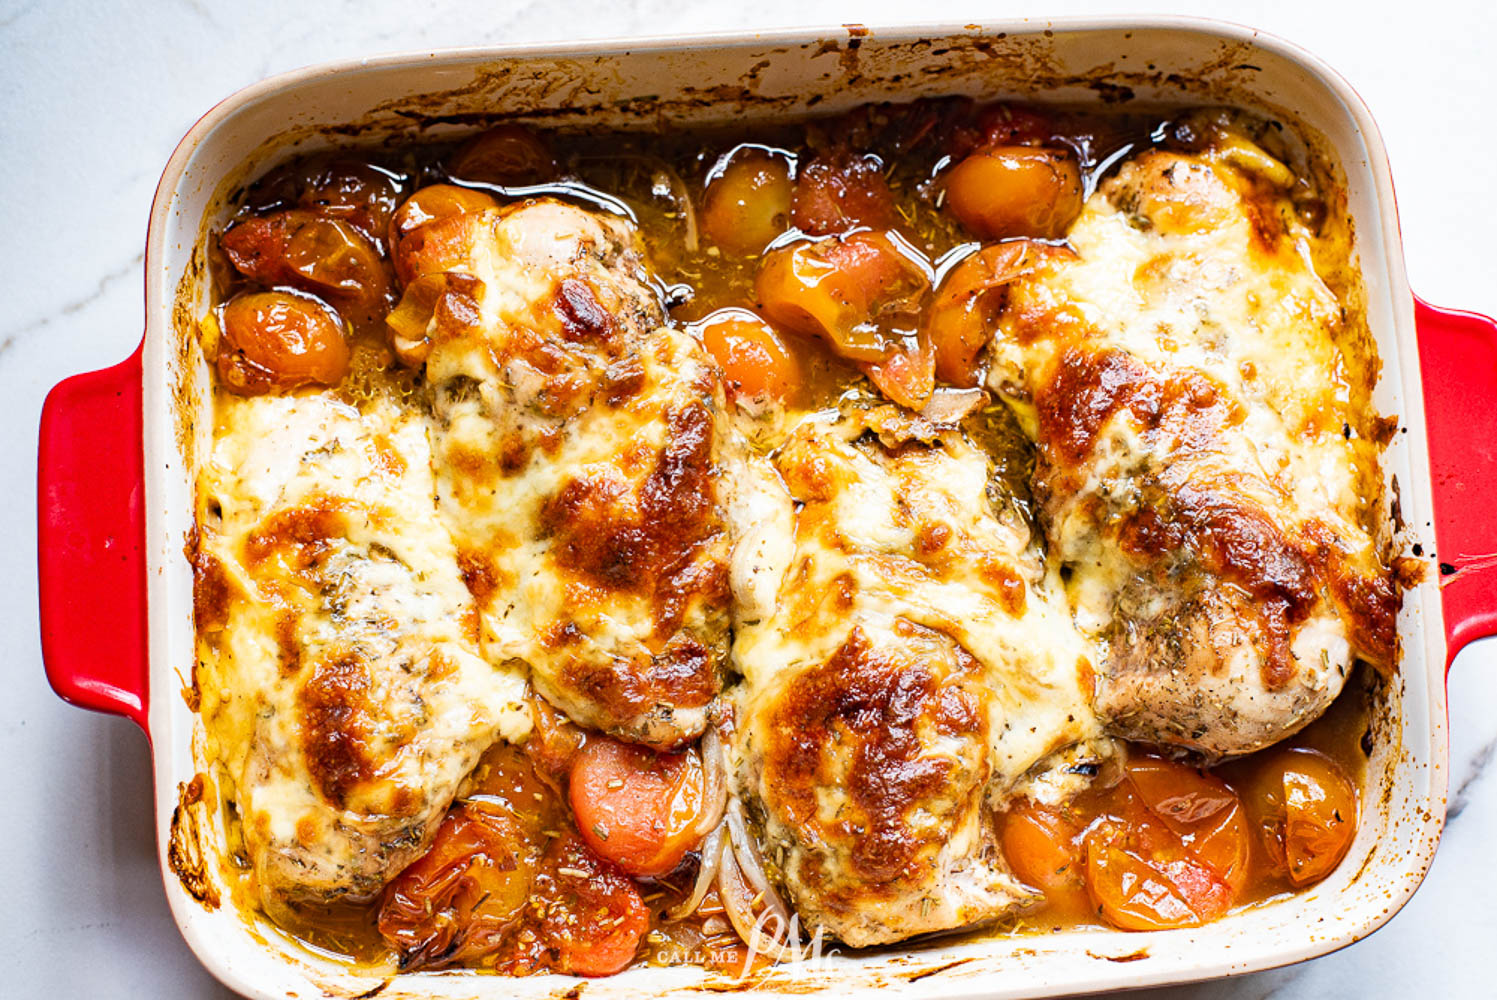 Chicken covered with cheese in a casserole dish with roasted tomatoes.